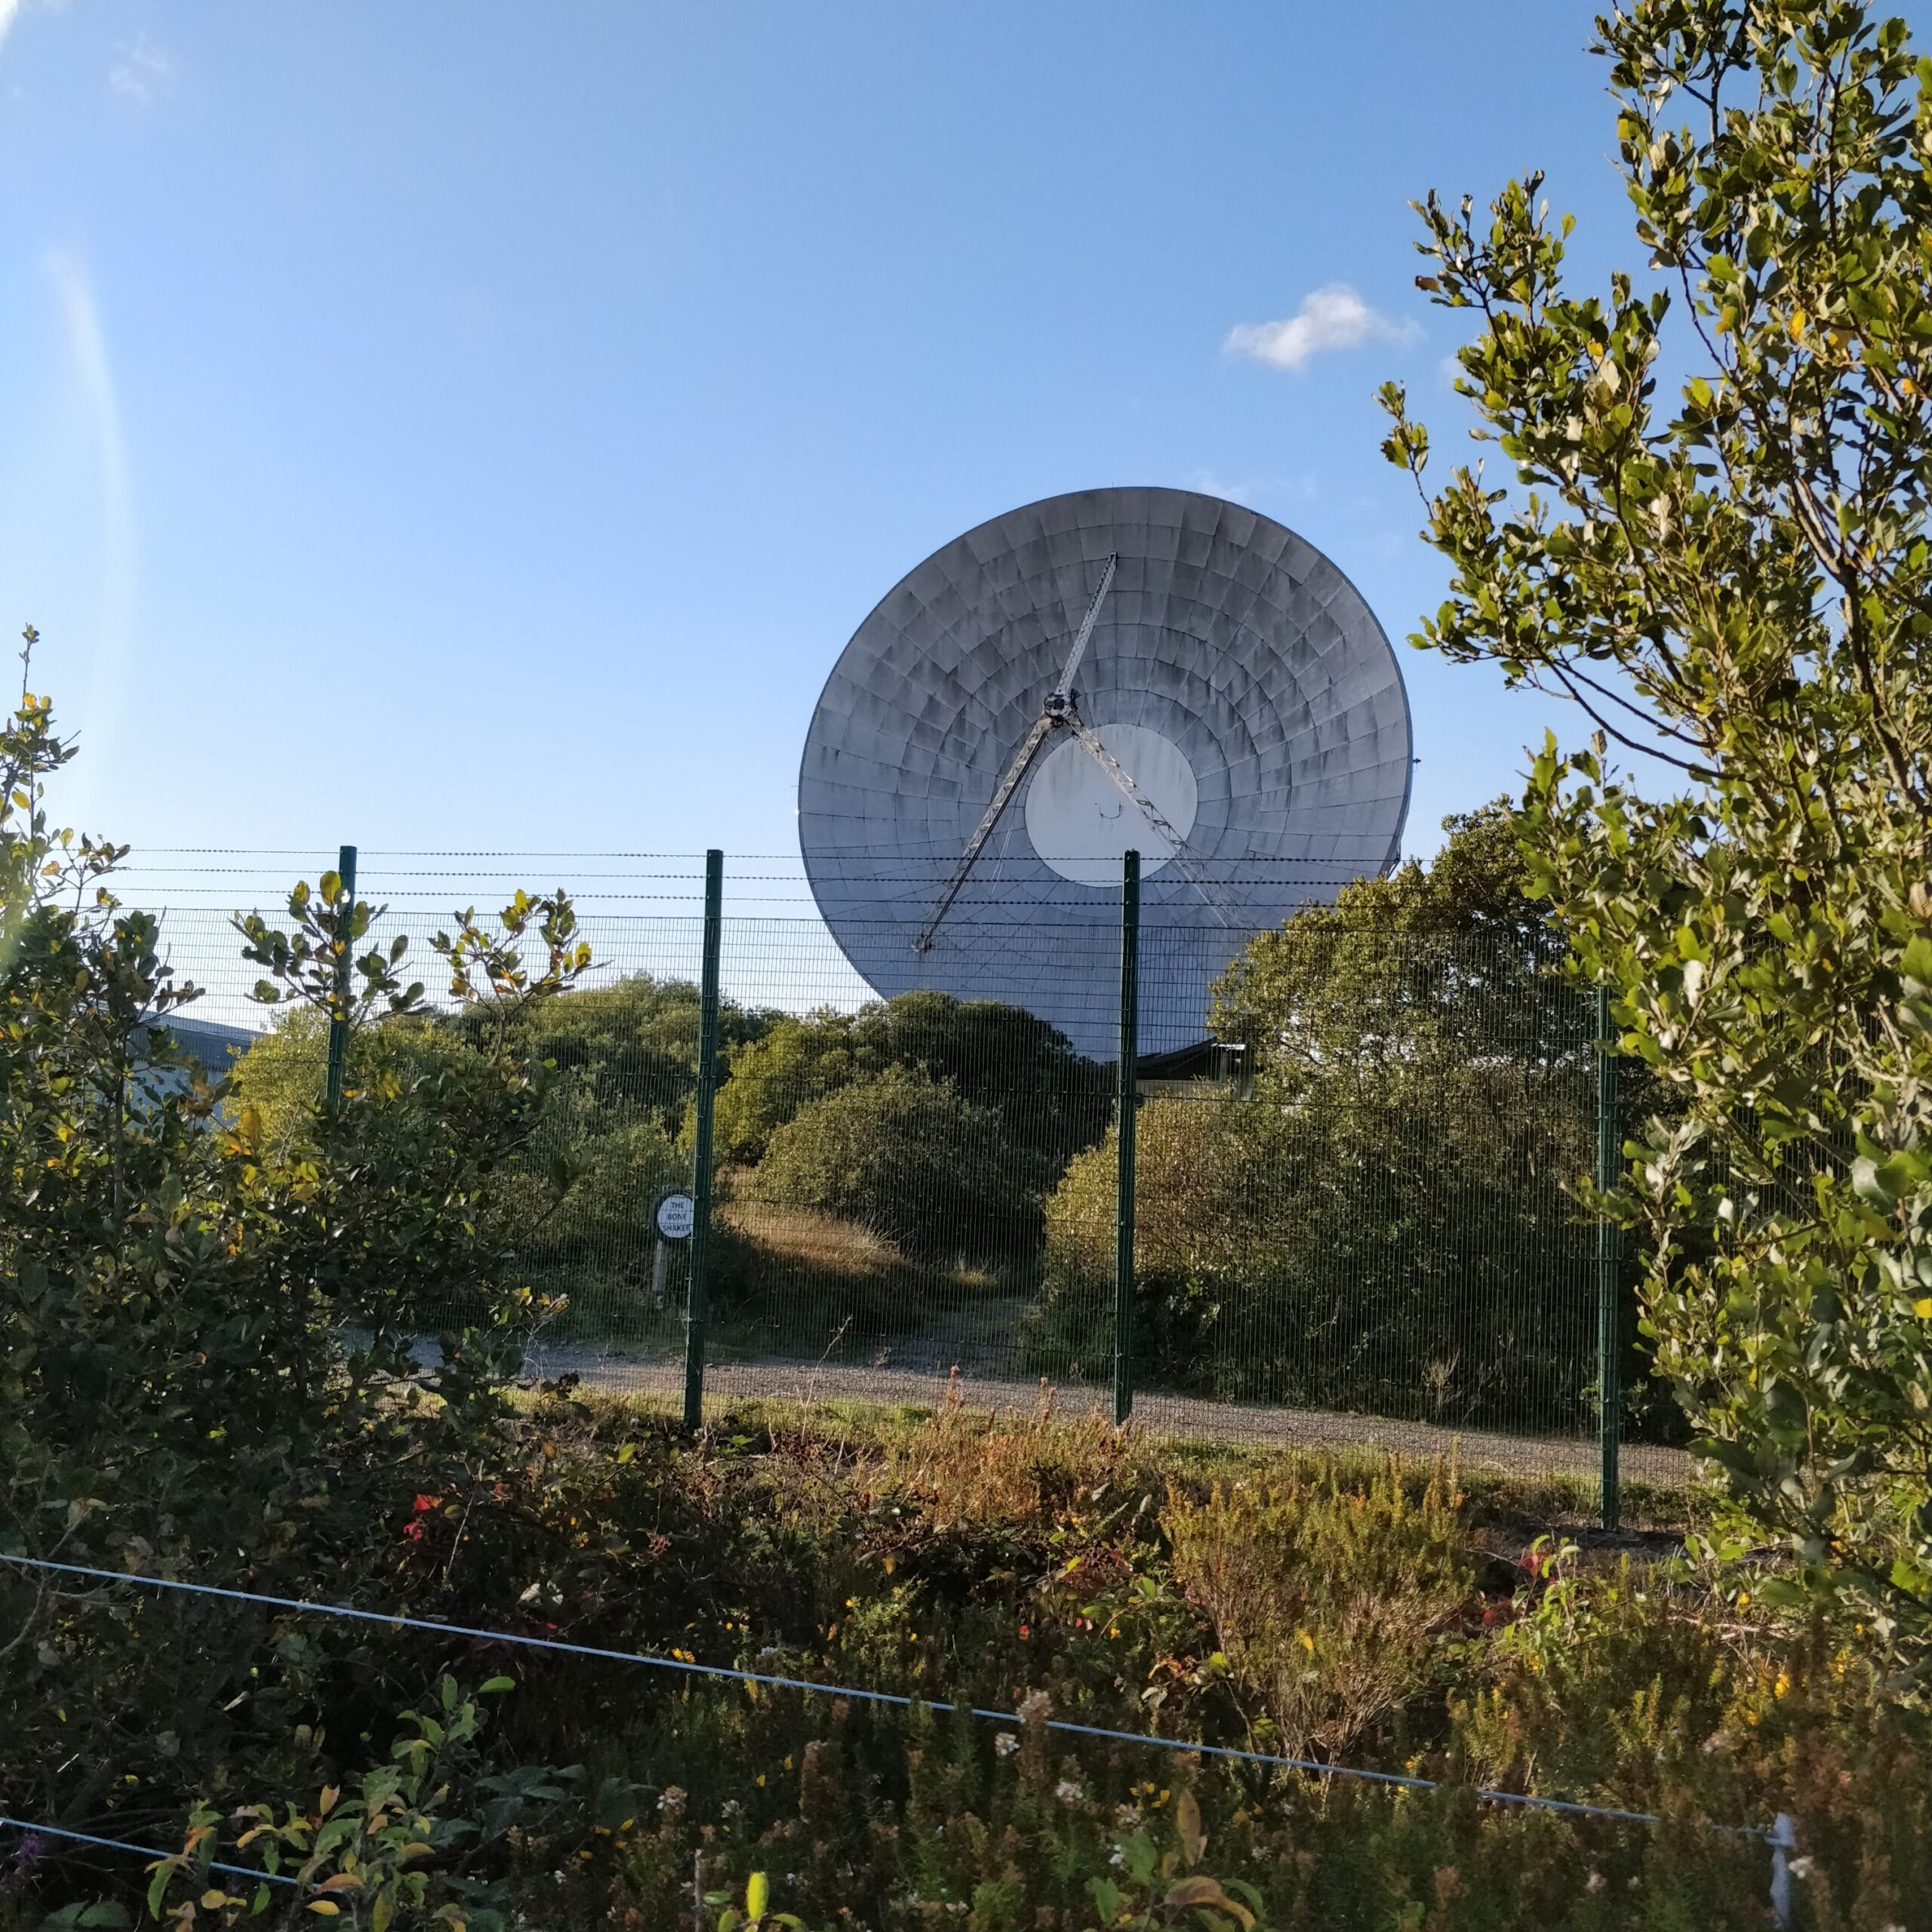 Goonhill Earth Station